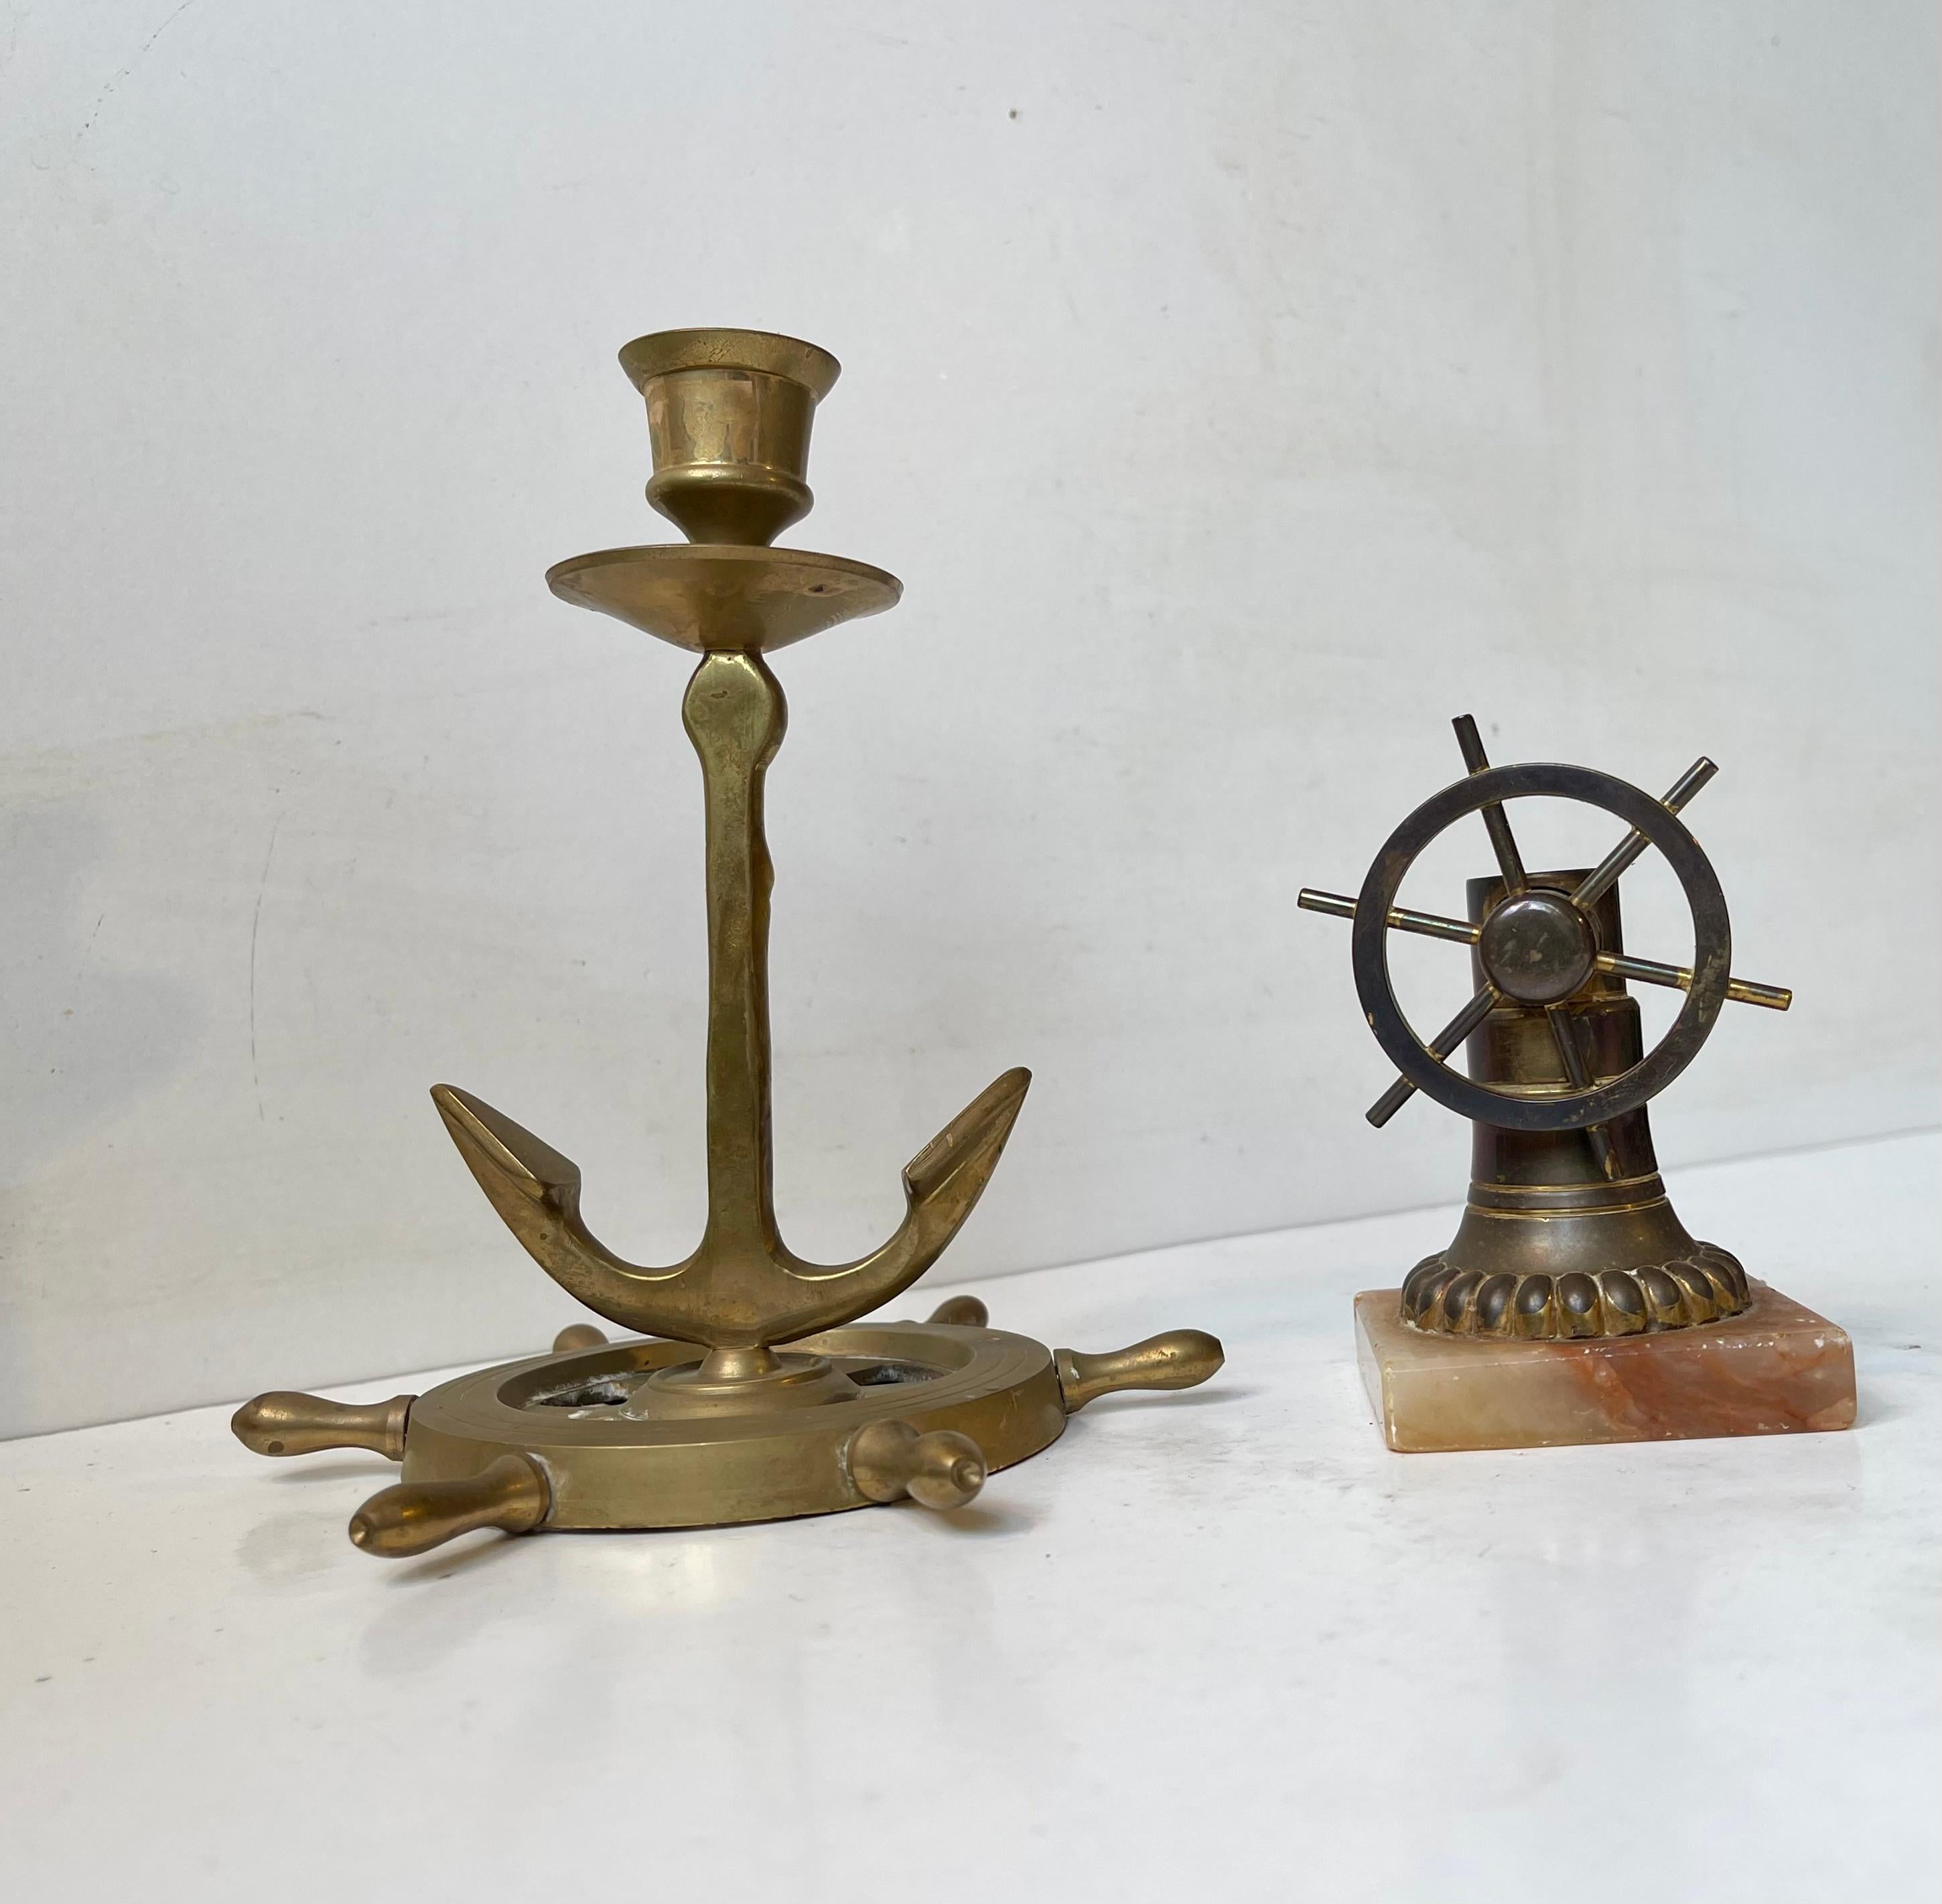 Nautical themed lot consisting of marble-based brass cigar cutter with a boats wheel cutting mechanism. It accompanied by a candleholder in the shape of an anchor with helm base. The set was made in Scandinavian during the 1930s or 40s.